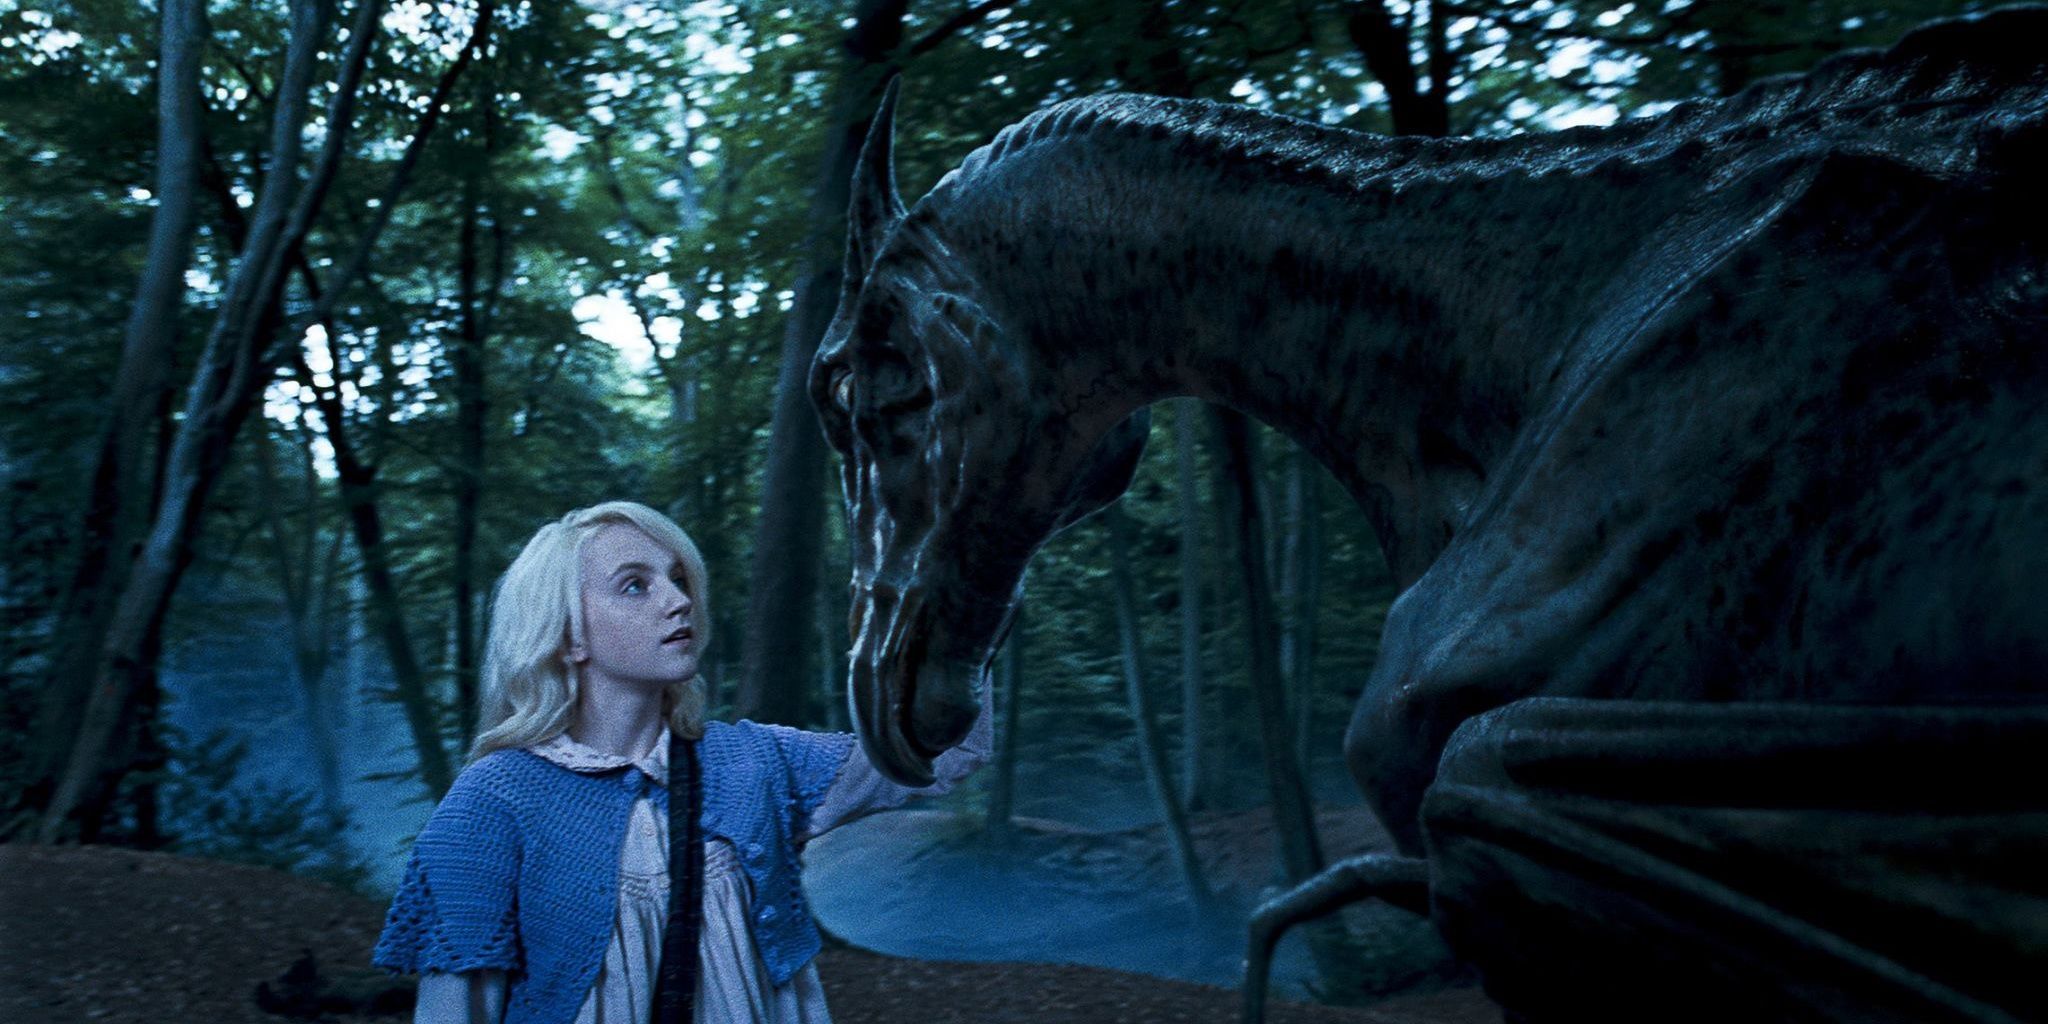 Harry Potter 10 Most Powerful Magical Creatures Shown In The Movies Ranked